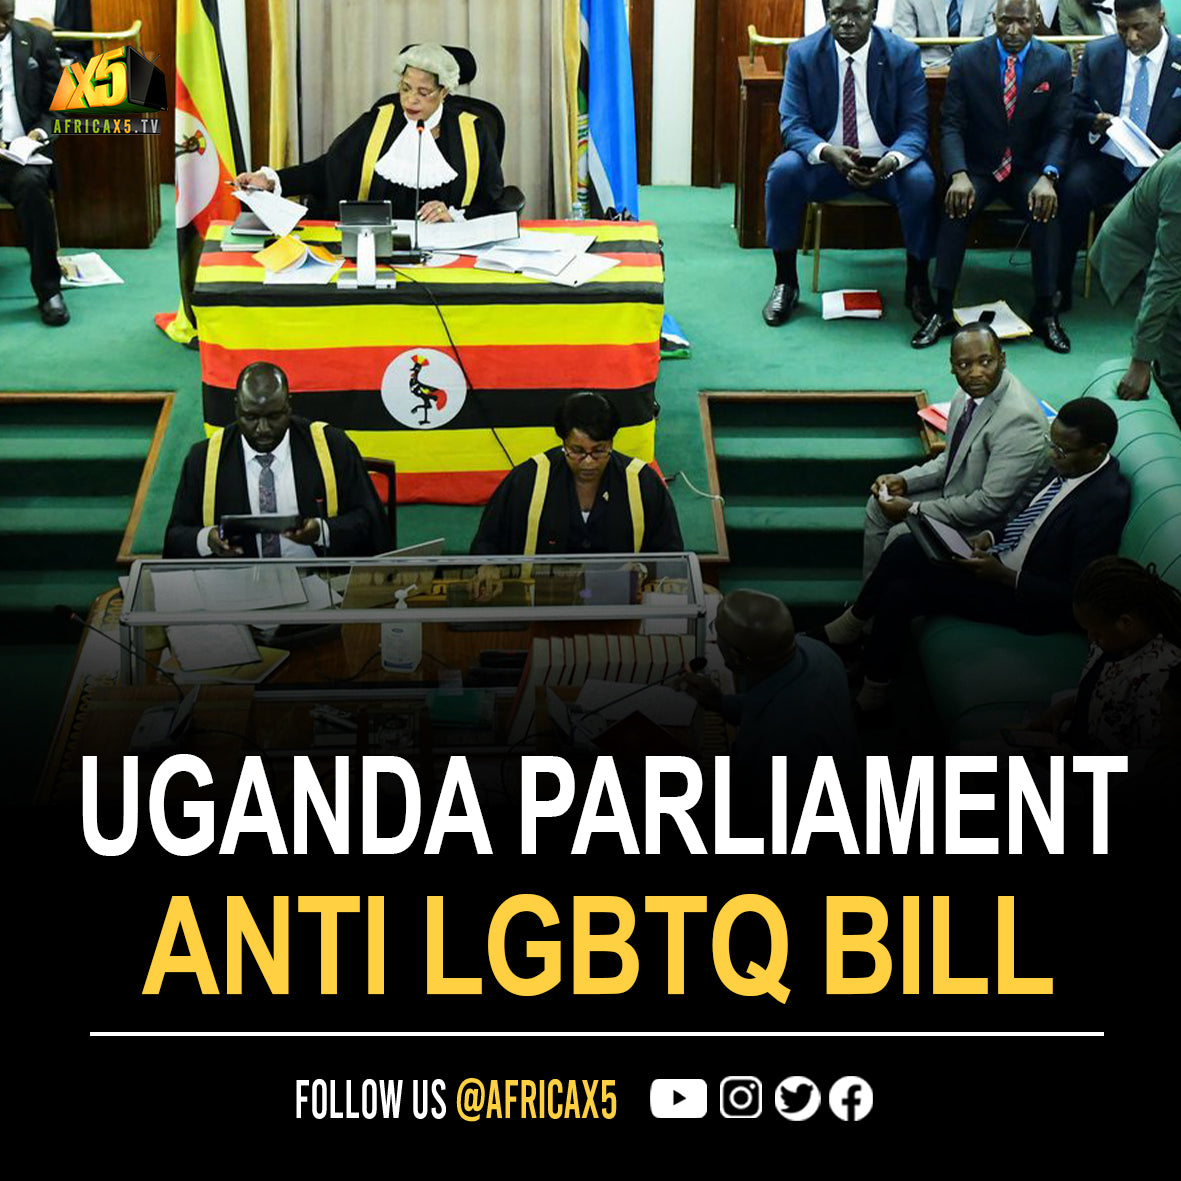 Uganda’s parliament has passed sweeping antigay legislation that proposes tough new penalties for same-sex relationships and criminalises anyone identifying as LGBTQ.